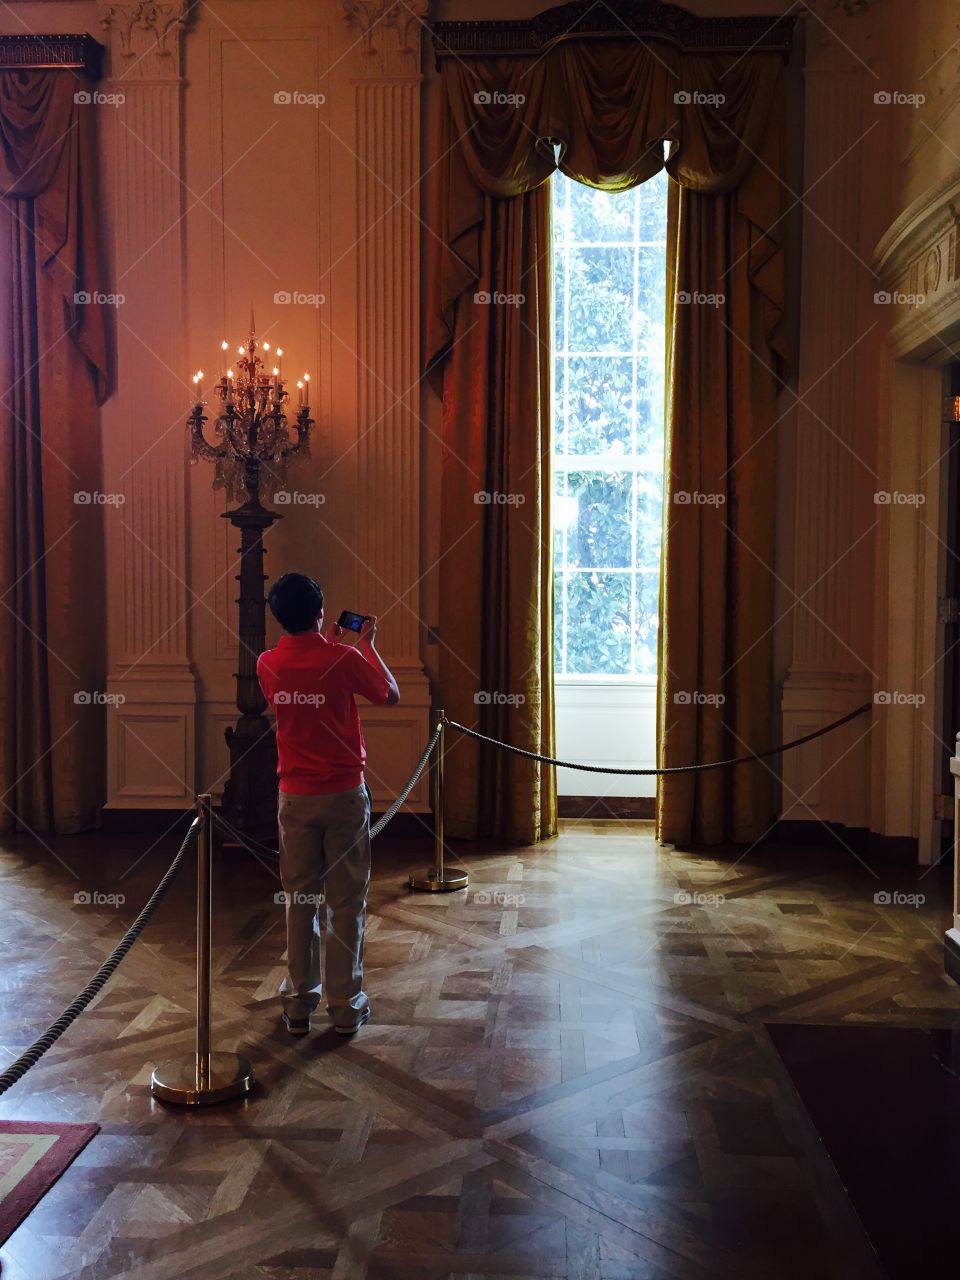 The White House photograph of a photographer at the window curtains